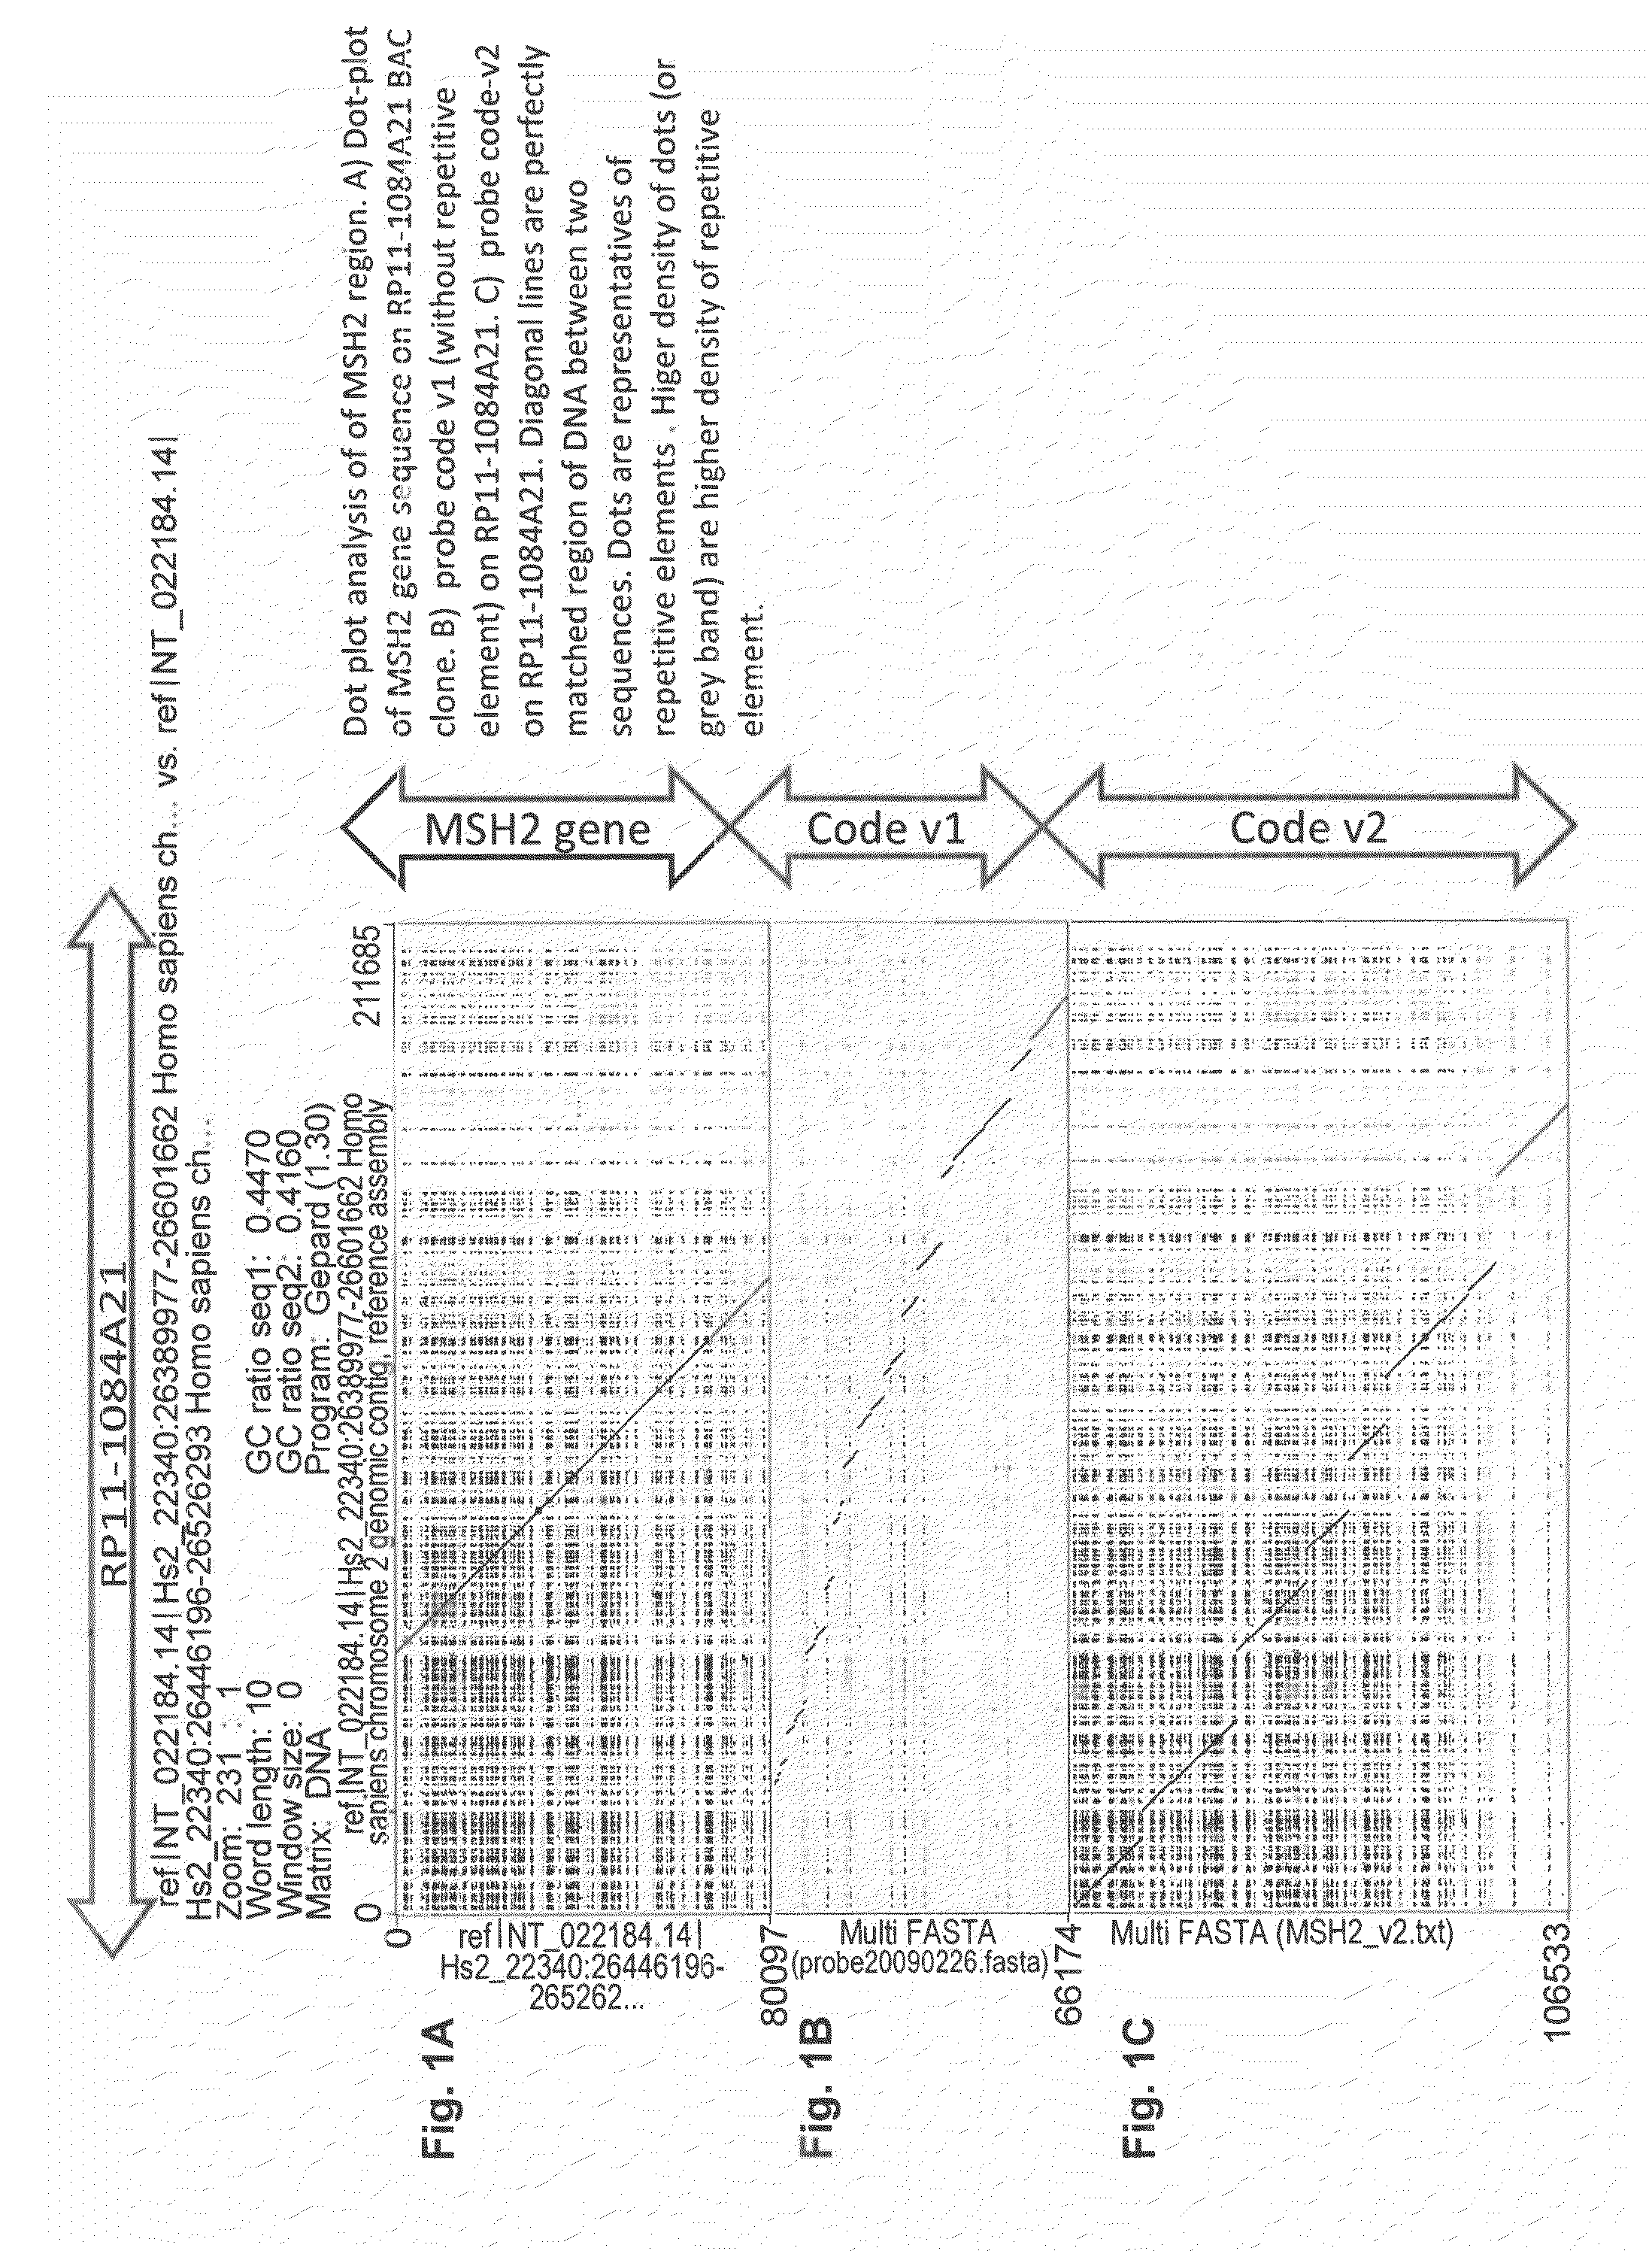 Method for identifying or detecting genomic rearrangements in a biological sample